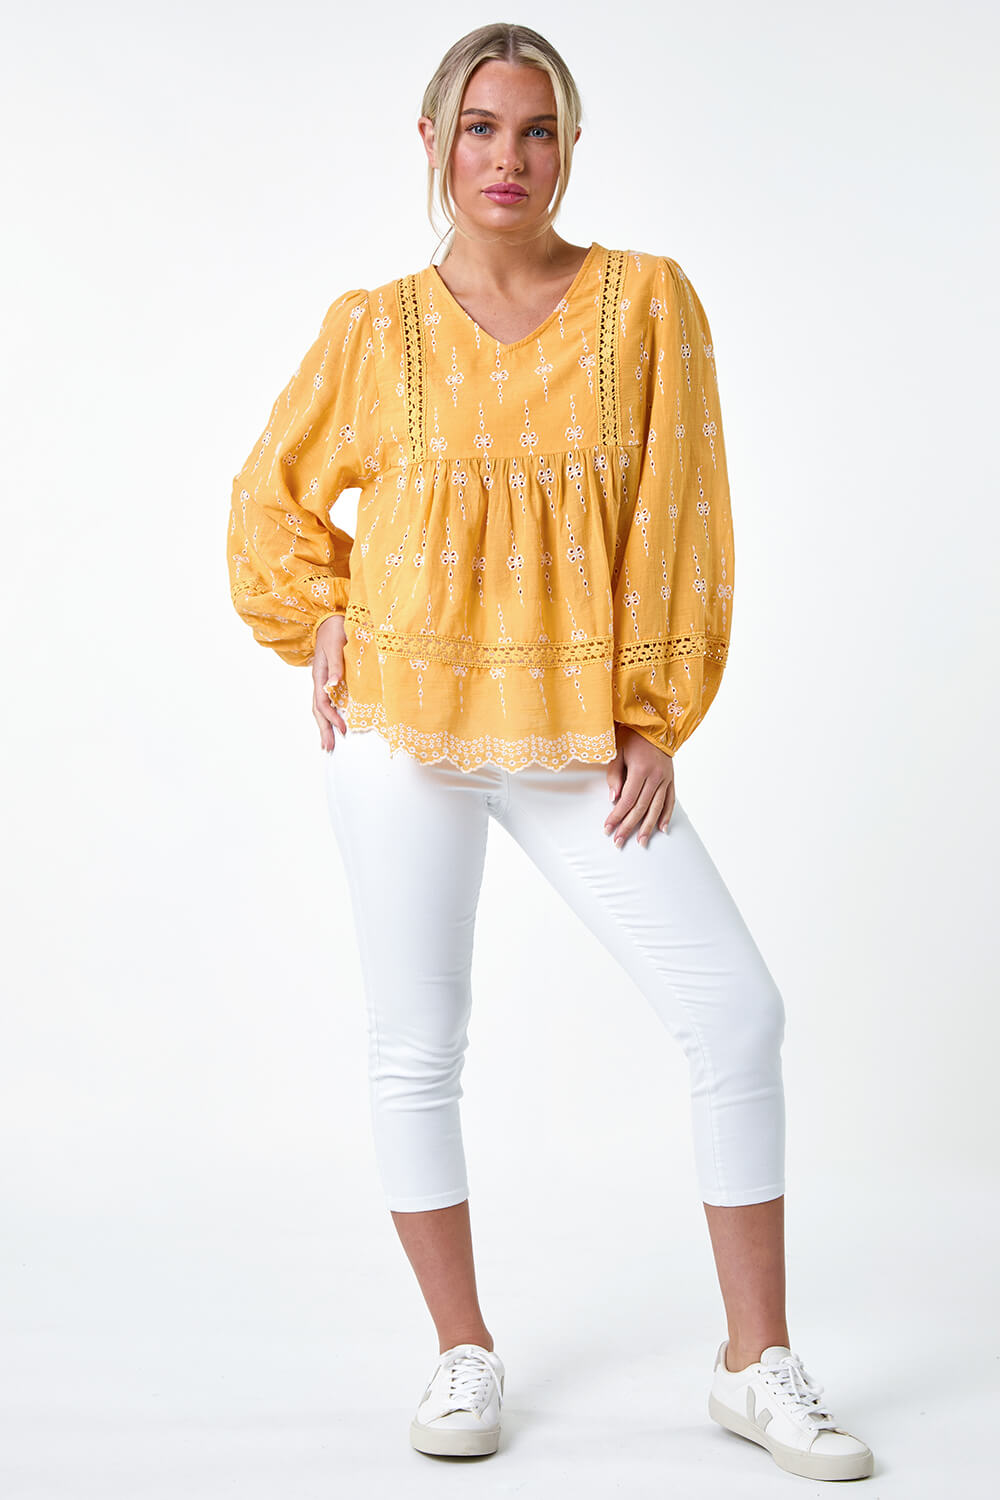 MANGO Petite Embroidered Cotton Smock Top, Image 2 of 5